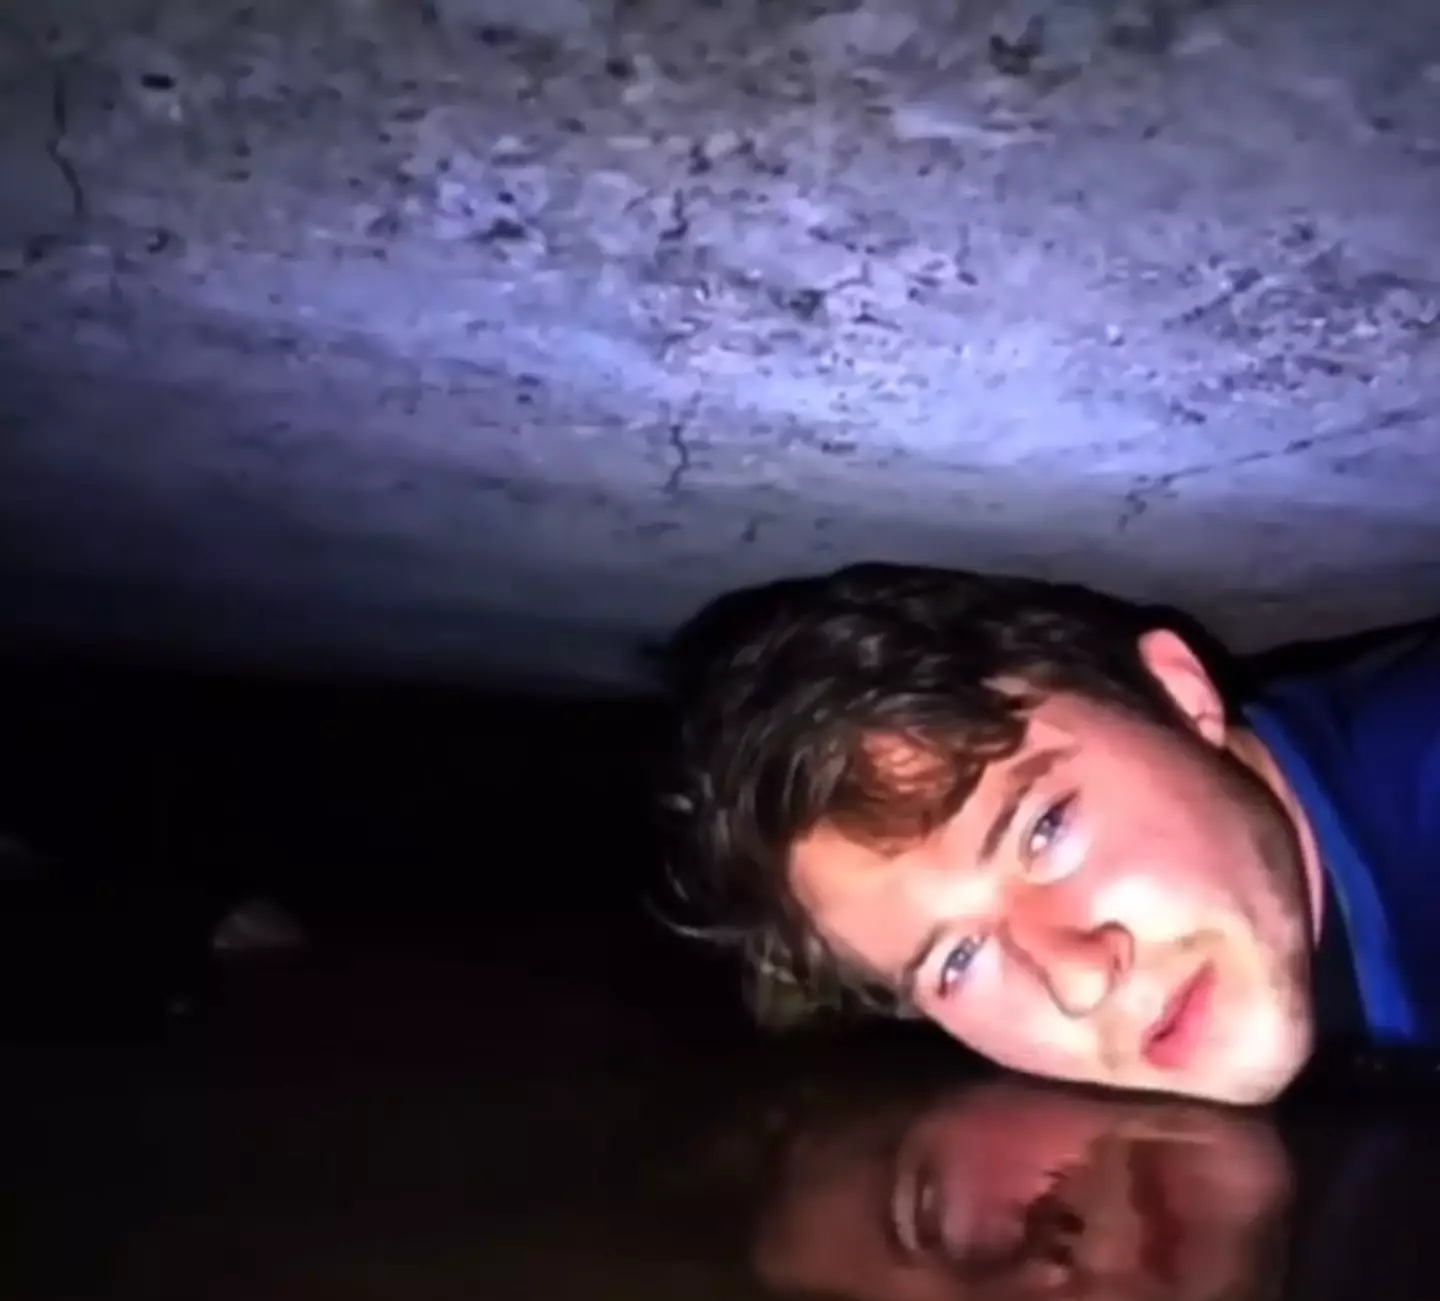 The video has been triggering many people's claustrophobia.